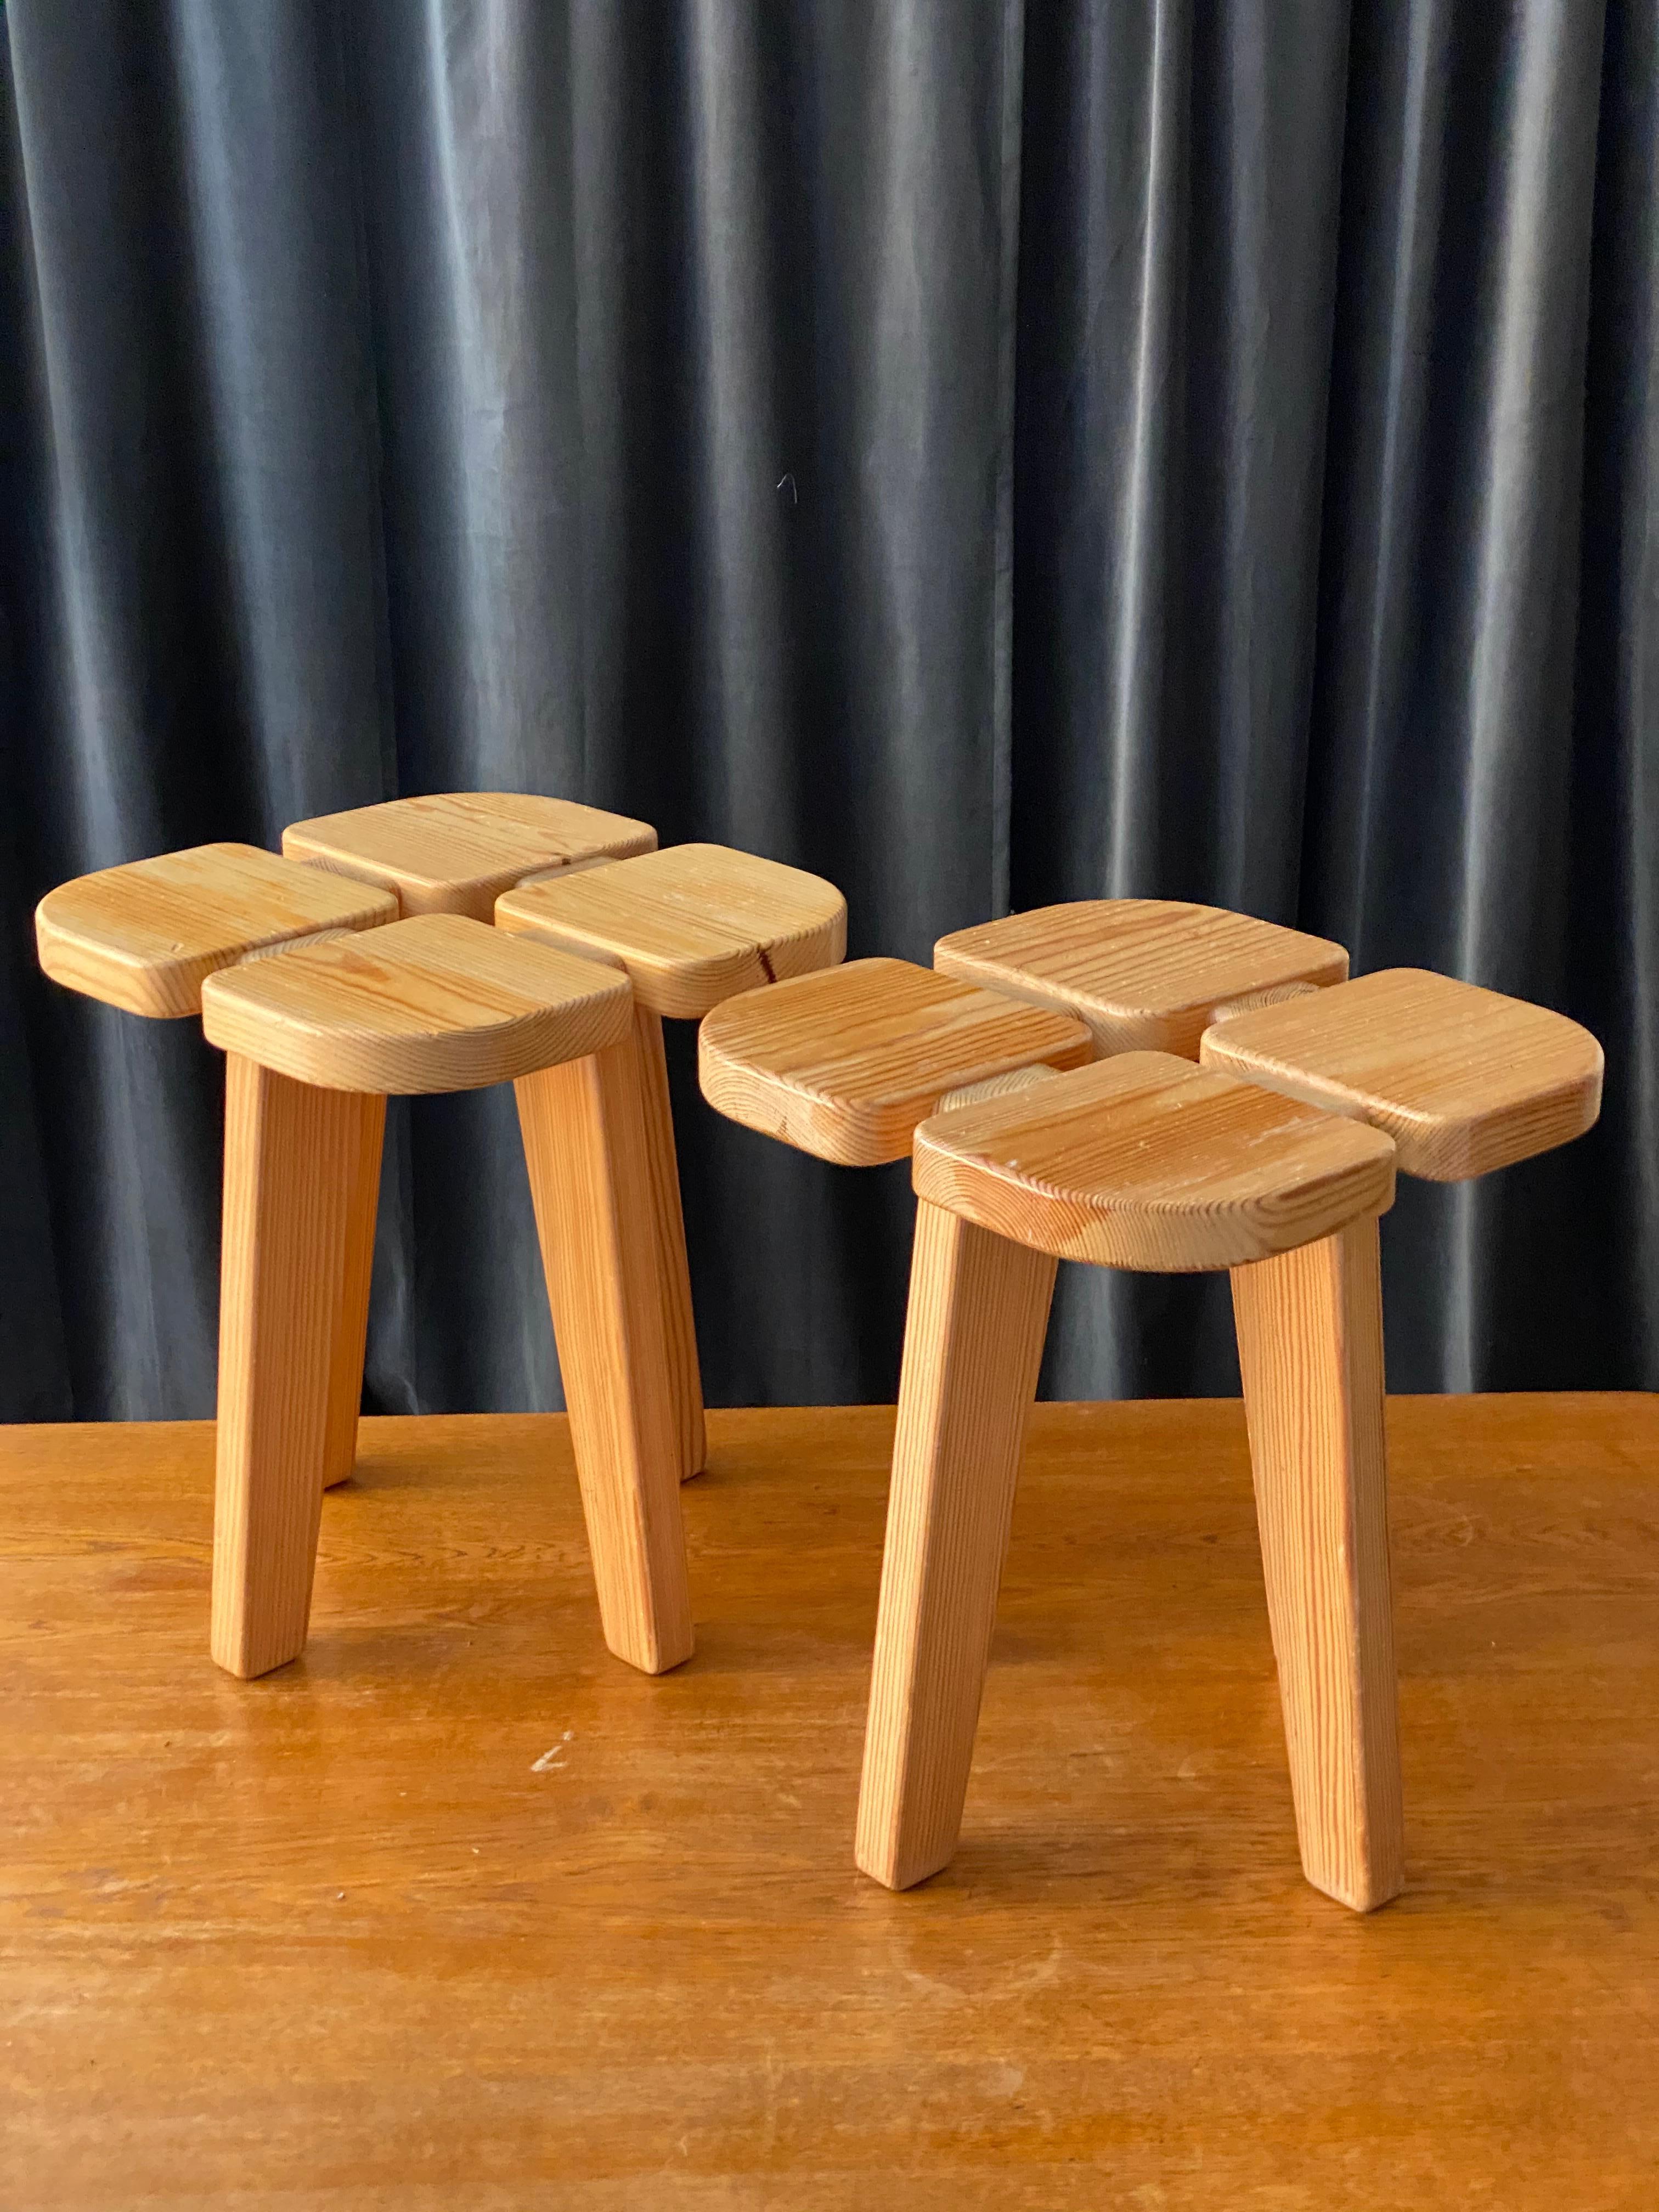 A pair of highly functionalist stools, designed by finnish Lisa Johansson-Pape, produced by Kervo Snickerifabrik for Oy Stockmann Ab, 1970s. 

Other designers working in similar functionalist ethos include Pierre Jeanneret, Pierre Chapo, Axel